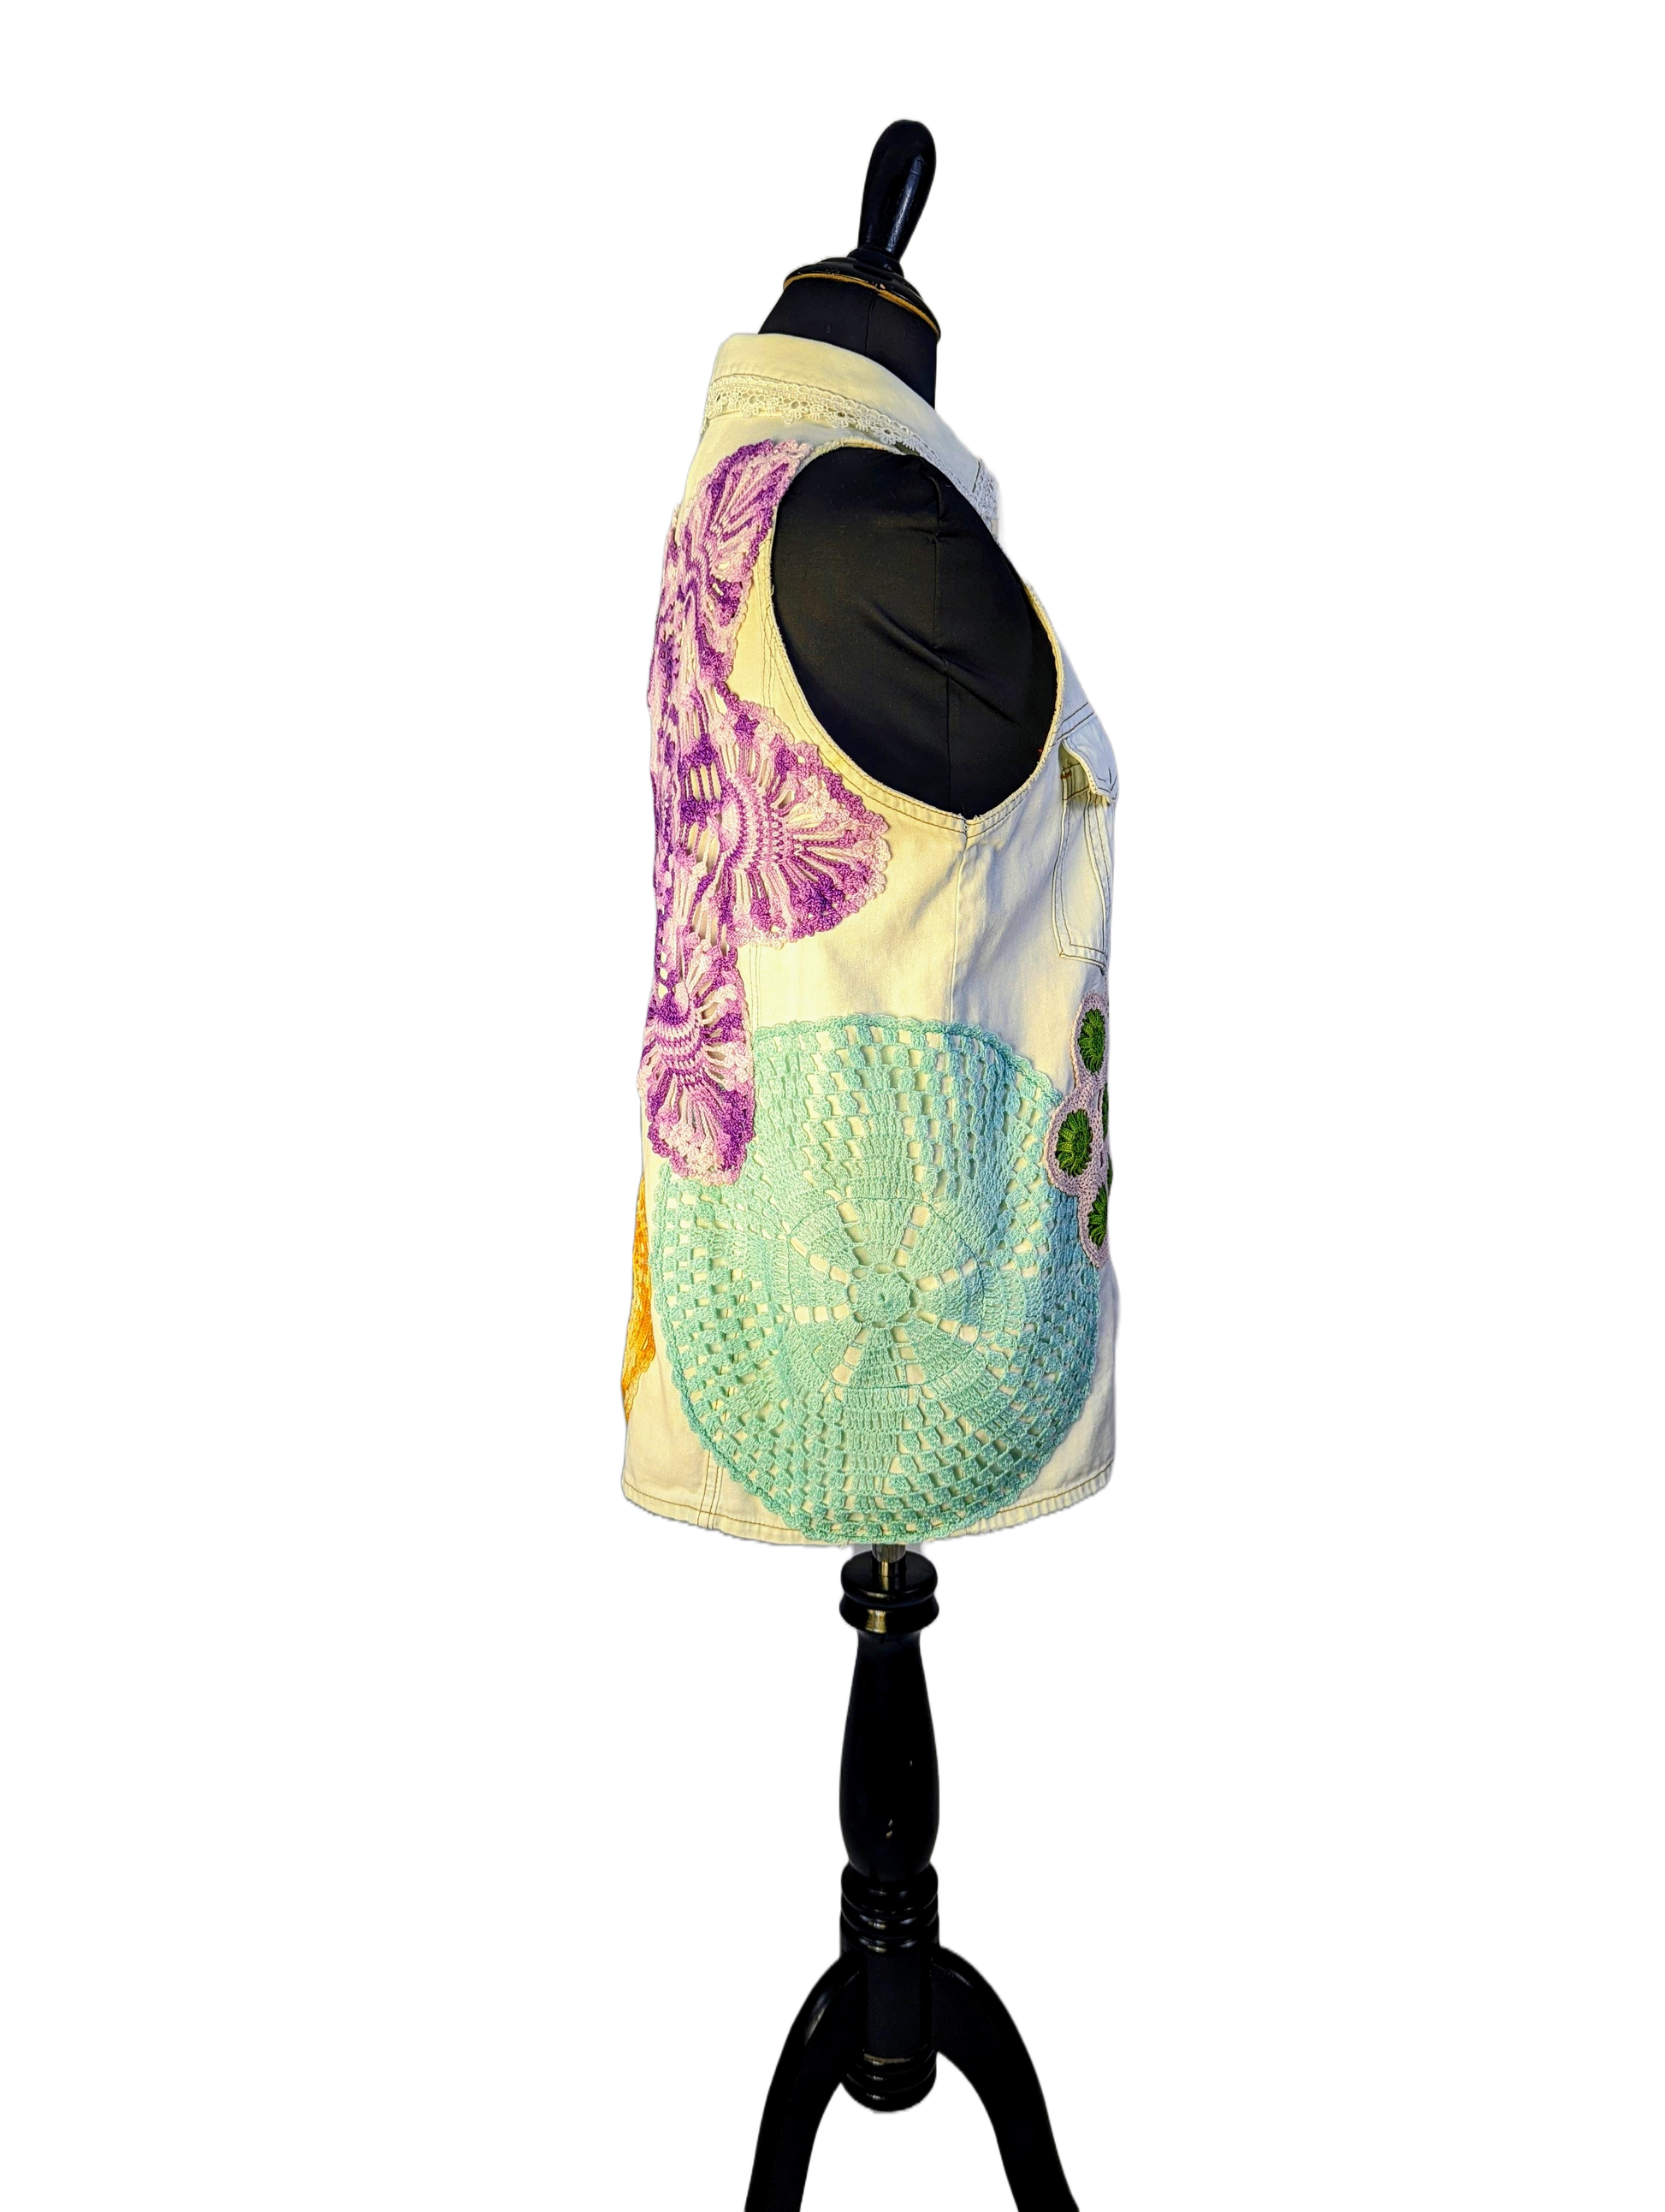 Side view of dress from displaying white vest with teal and purple doilies.